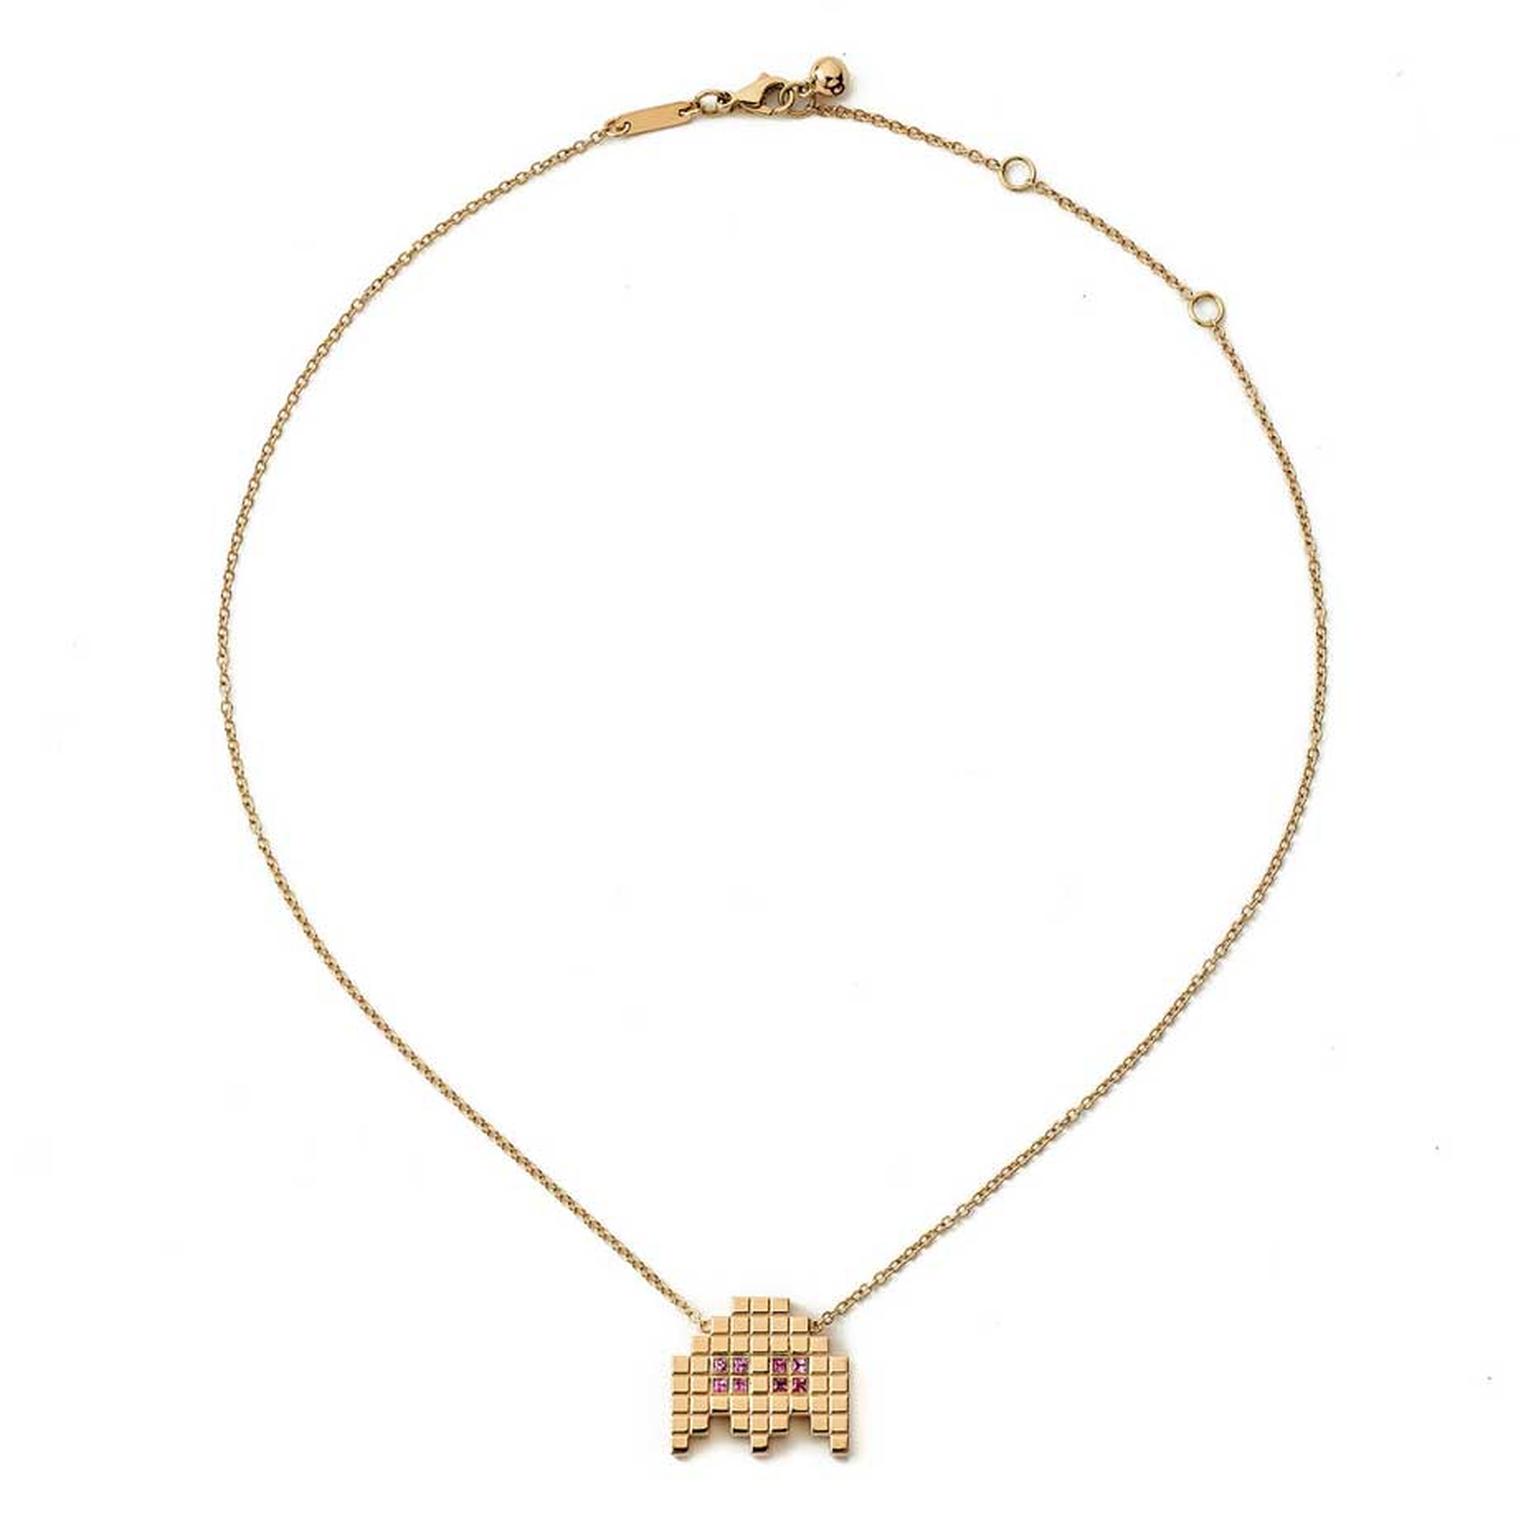 Francesca Grima Invader II necklace in polished yellow gold and princess-cut pink sapphires.